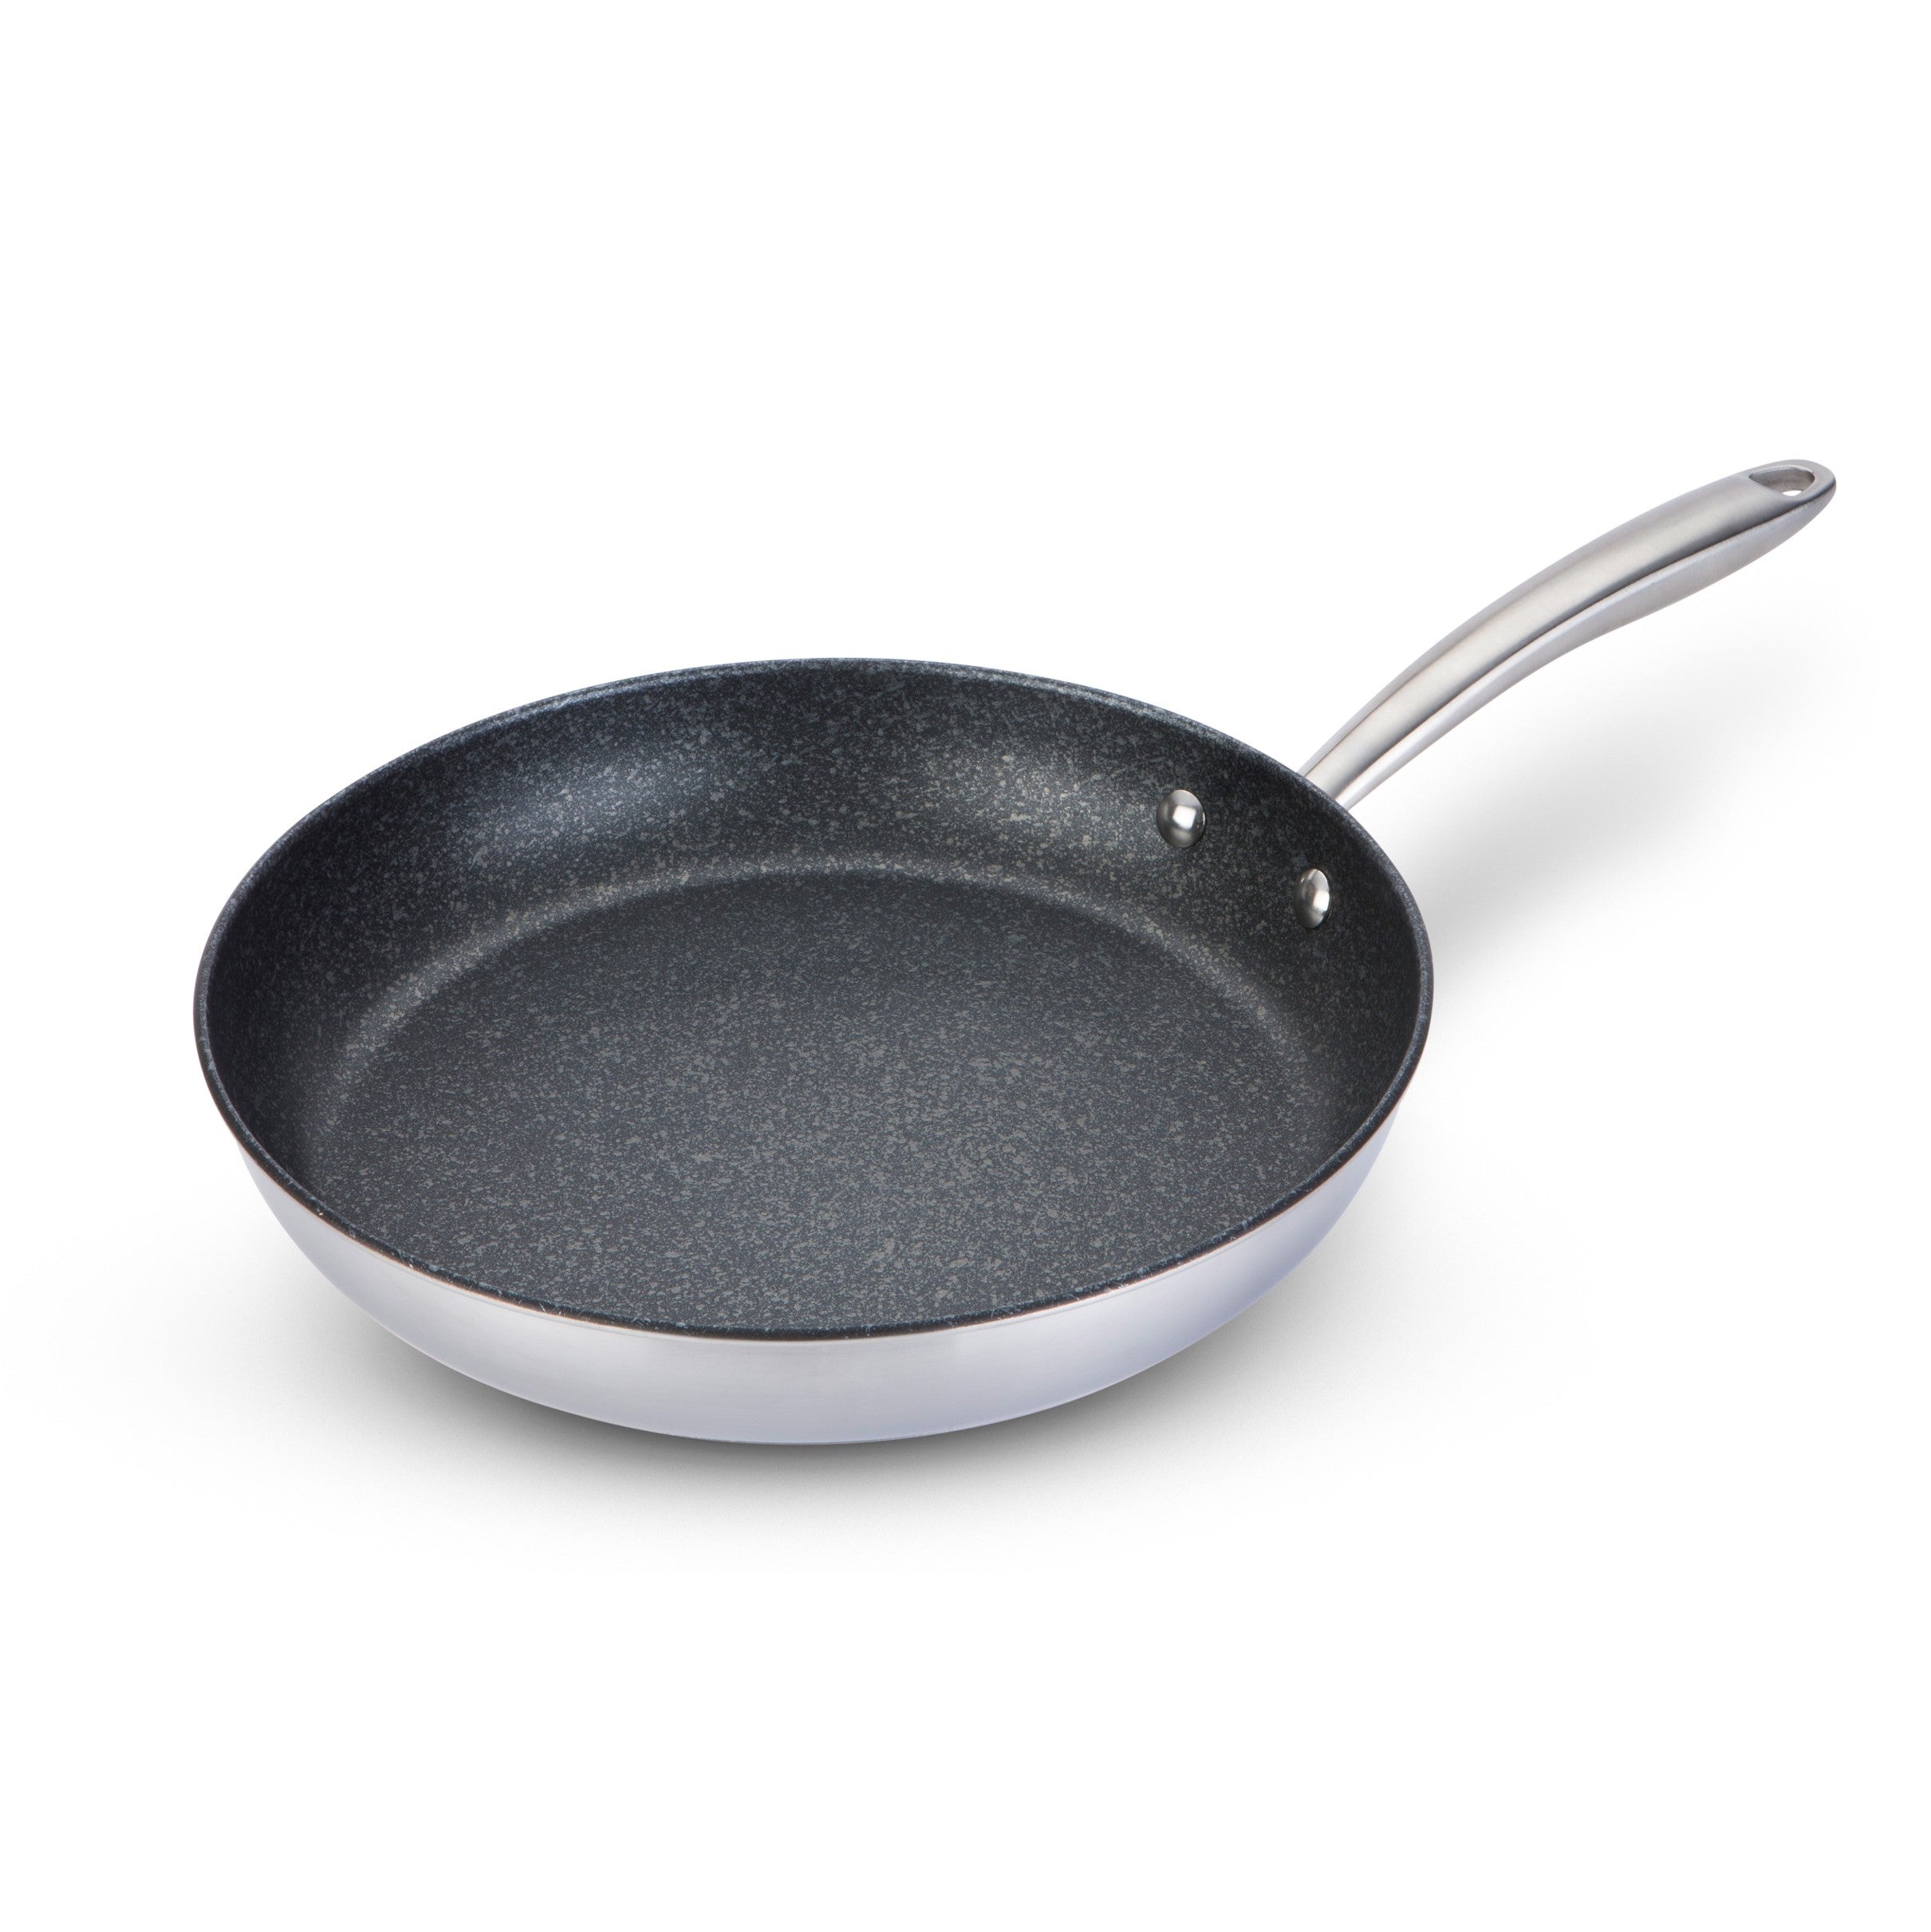 Prestige Scratch Guard Non-Stick Stainless Steel Frying Pan, 29cm